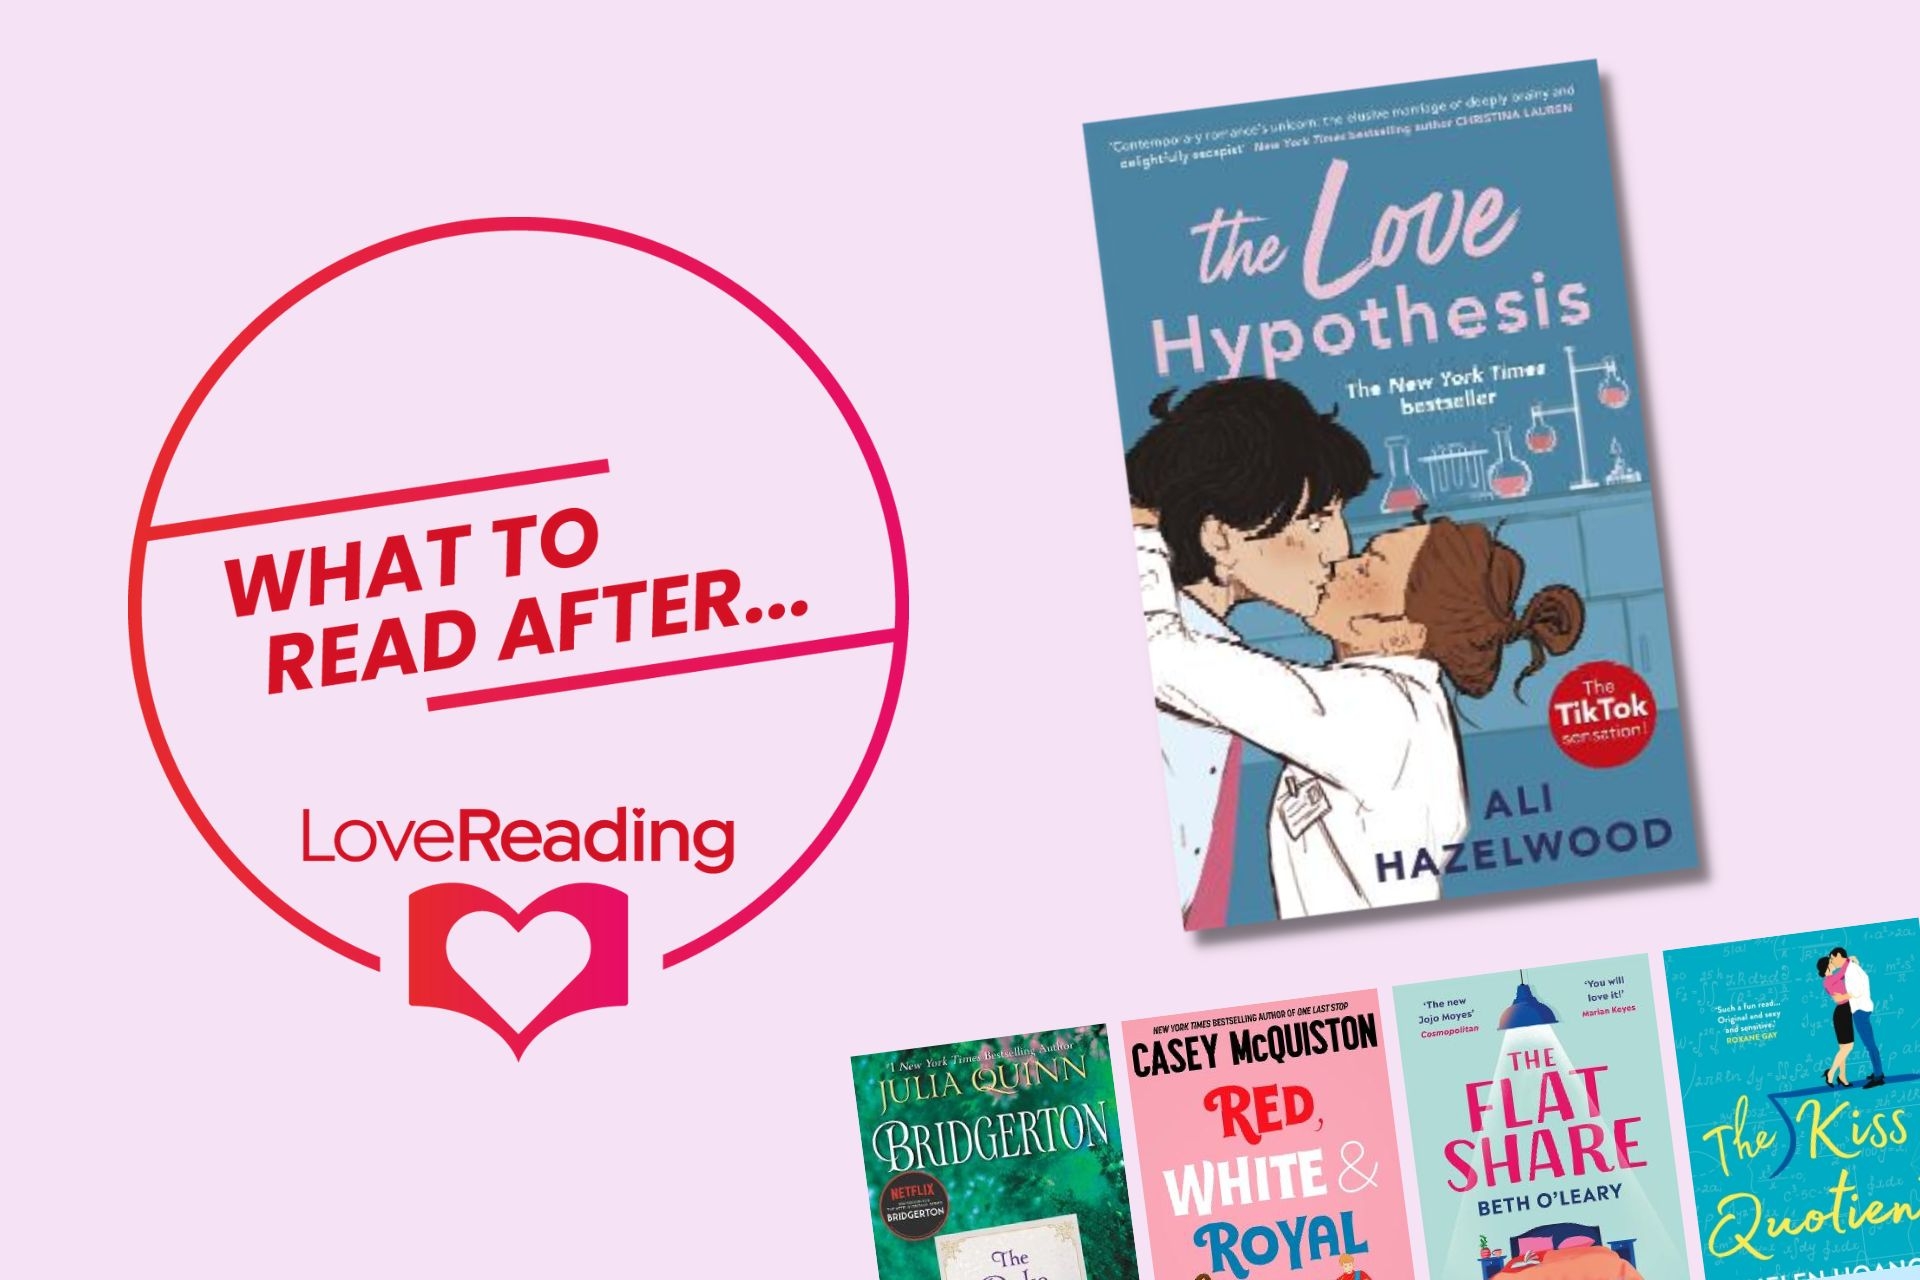 What To Read After The Love Hypothesis